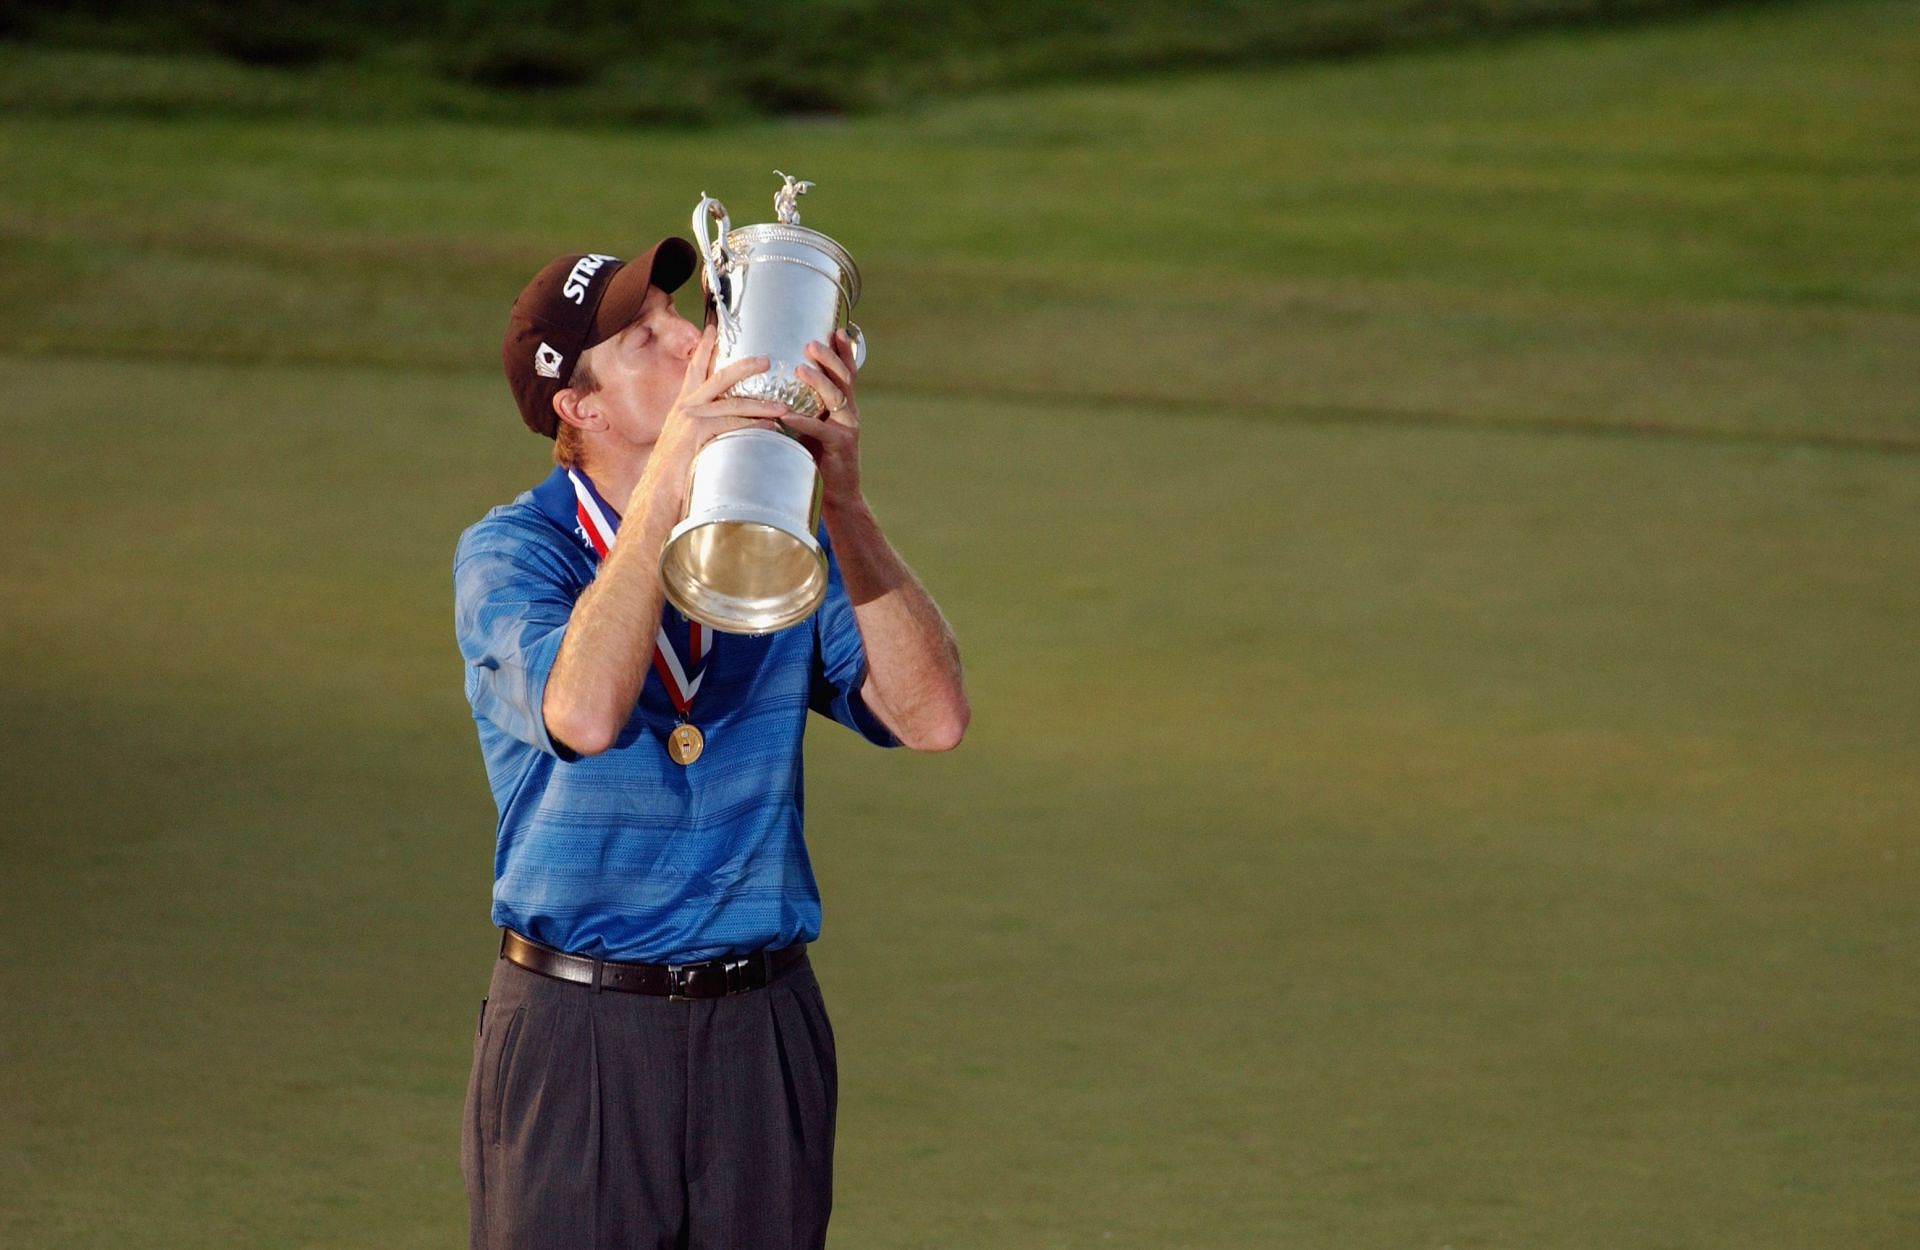 Jim Furyk after winning the 2003 U.S Open at Olympia Fields